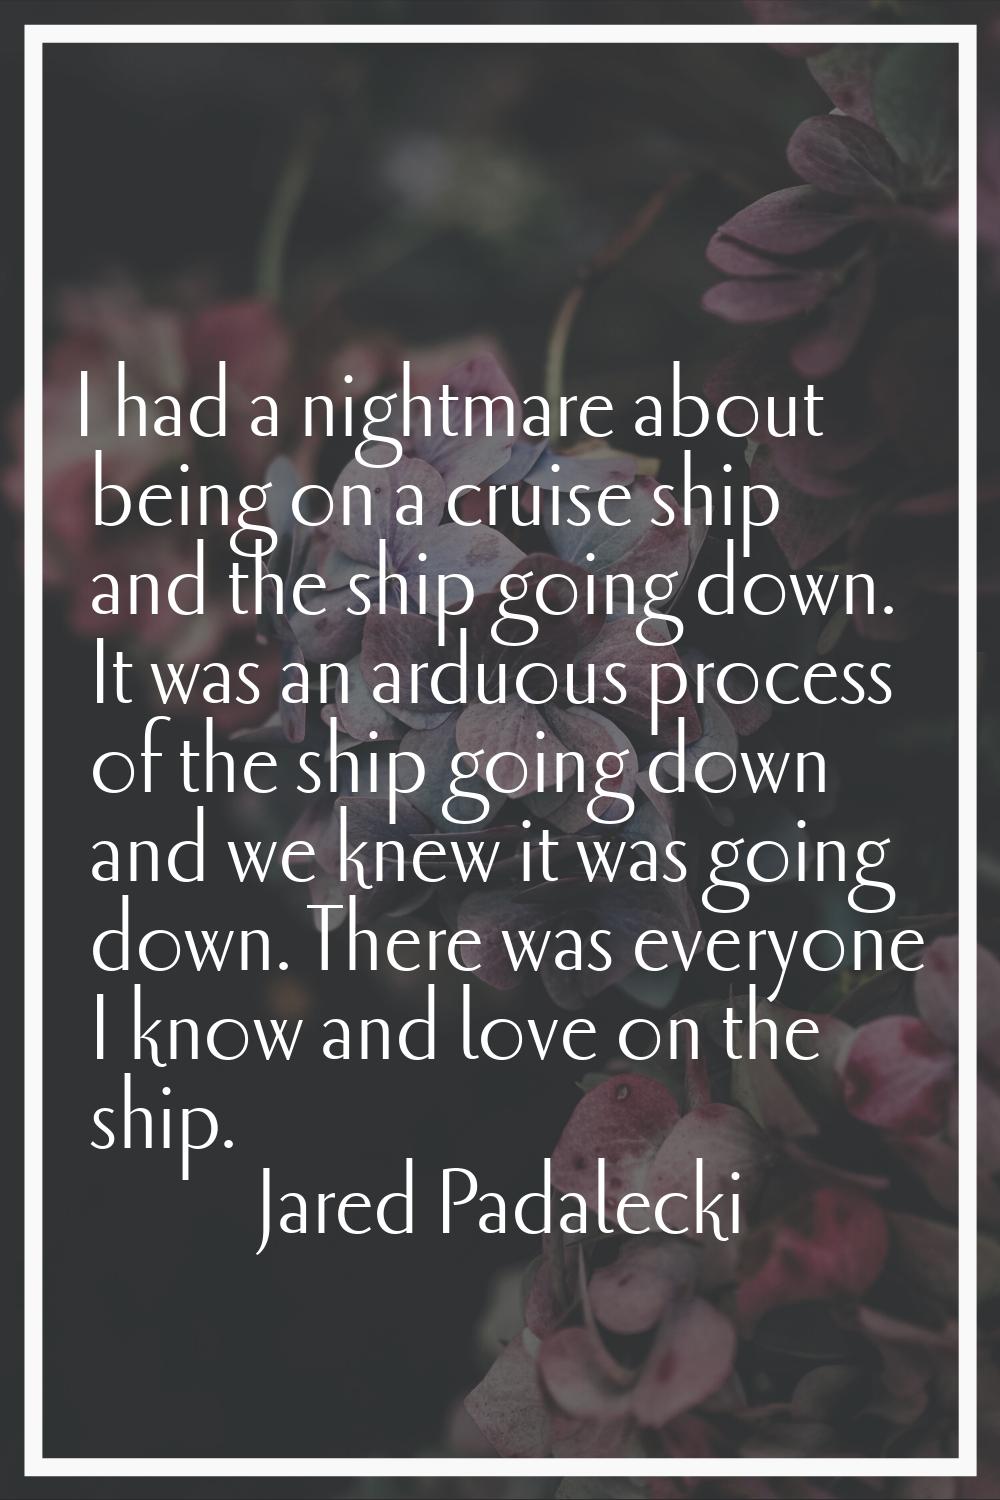 I had a nightmare about being on a cruise ship and the ship going down. It was an arduous process o